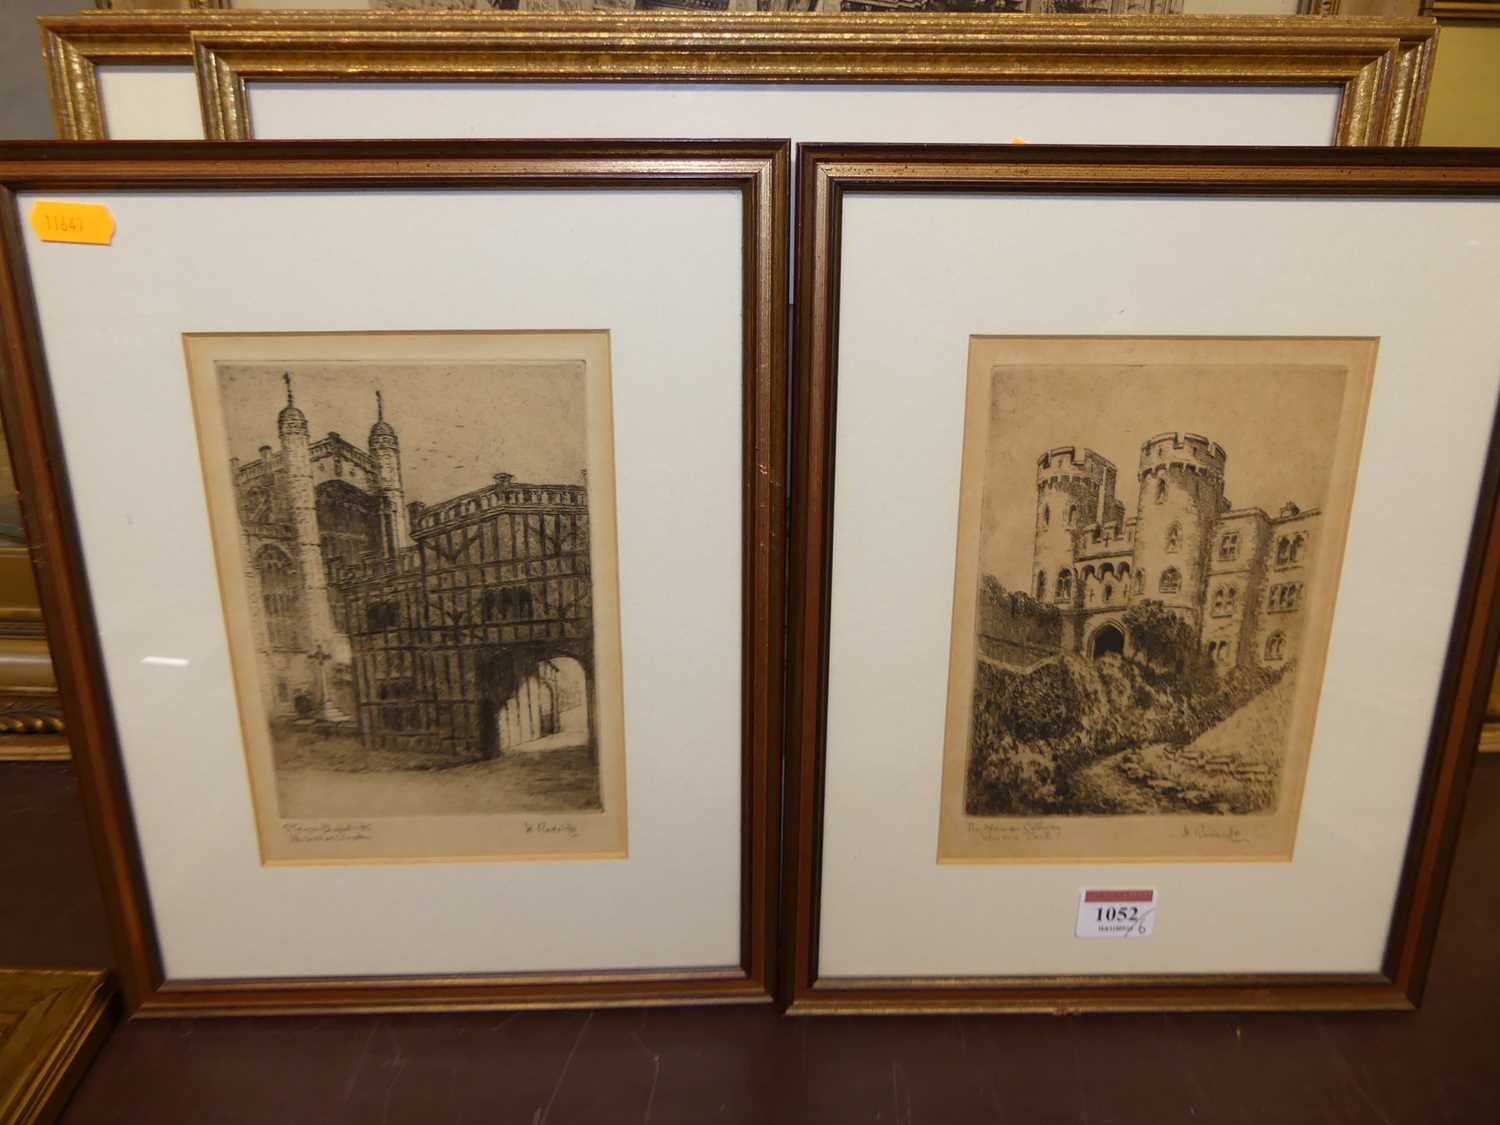 H Radcliffe - Pair; The Norman Gateway, Windsor Castle, and St George's Chapel, etching; together - Image 6 of 6